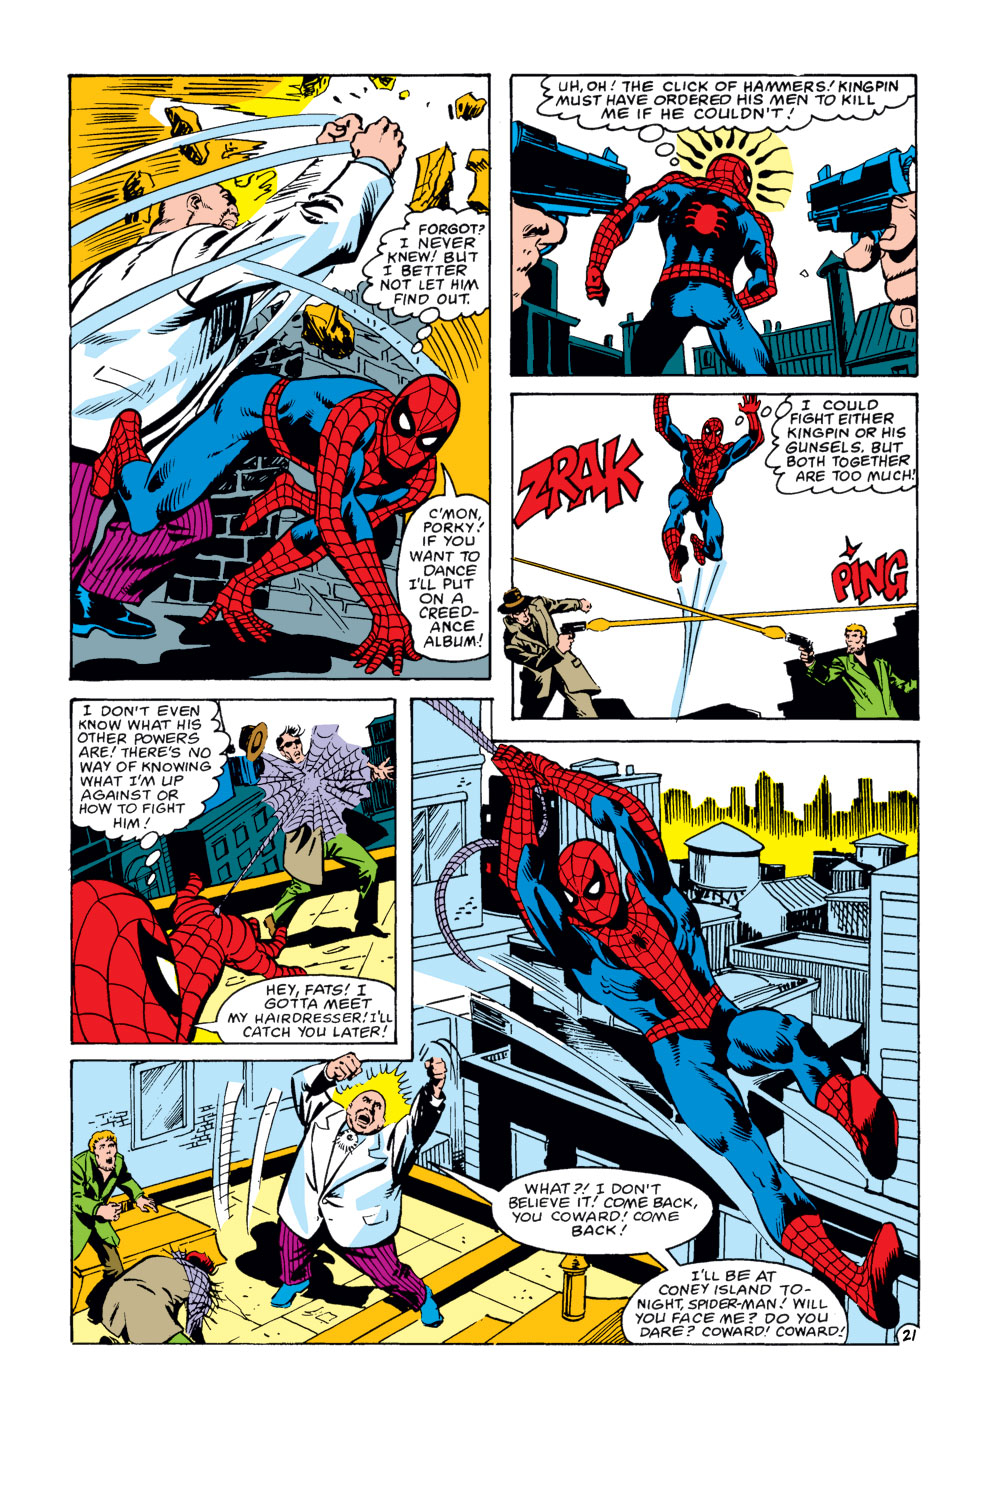 What If? (1977) issue 30 - Spider-Man's clone lived - Page 22